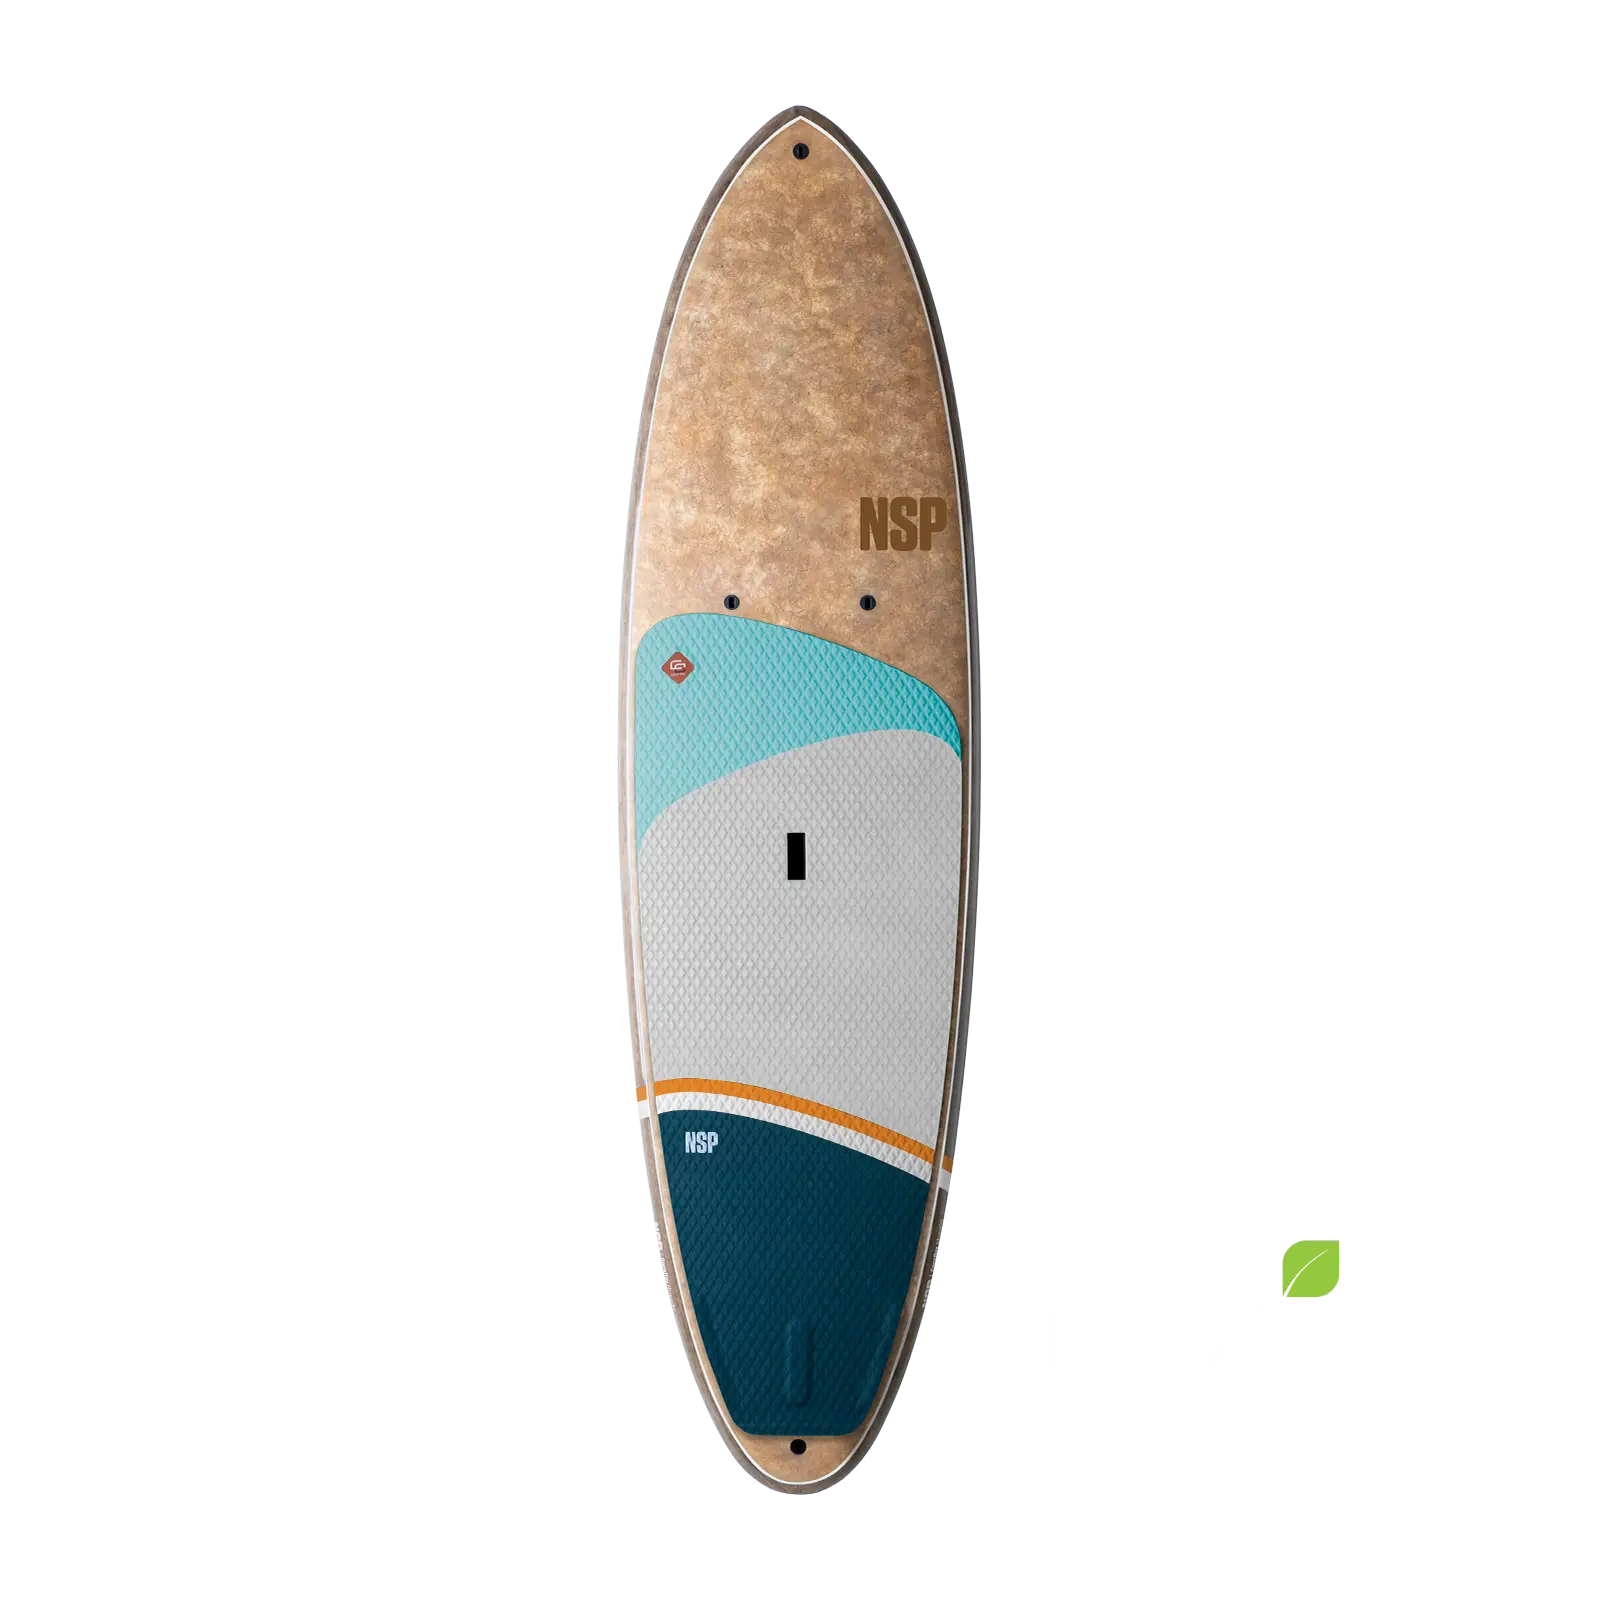 NSP Allrounder CocoFlax 9'2" | 129.5 L Natural NSP Europe